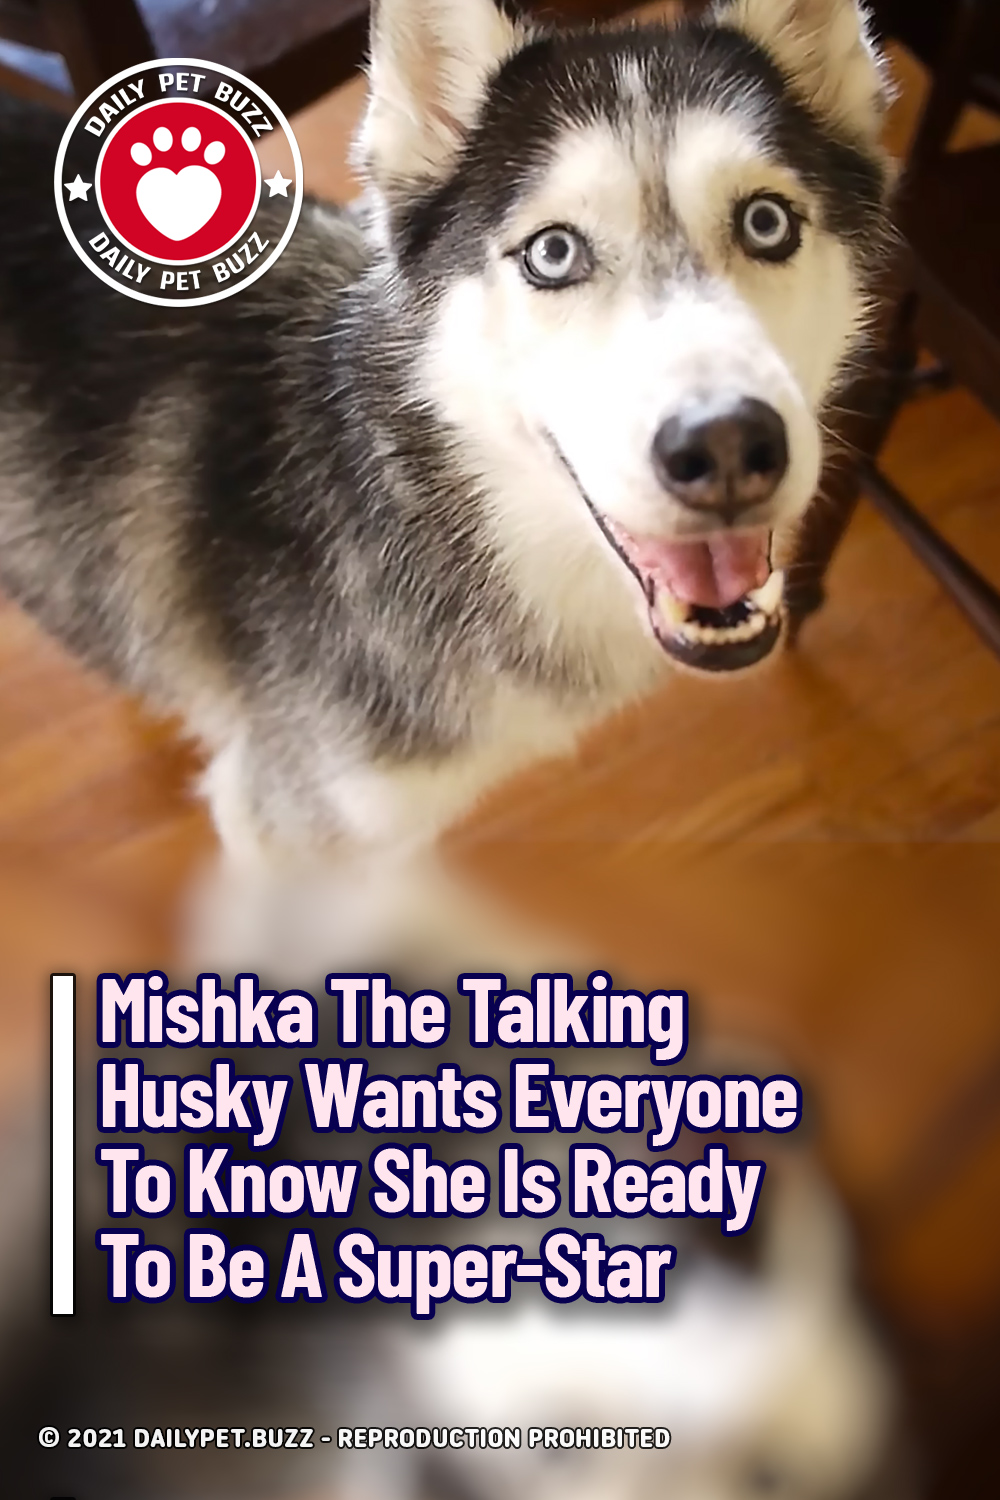 Mishka The Talking Husky Wants Everyone To Know She Is Ready To Be A Super-Star